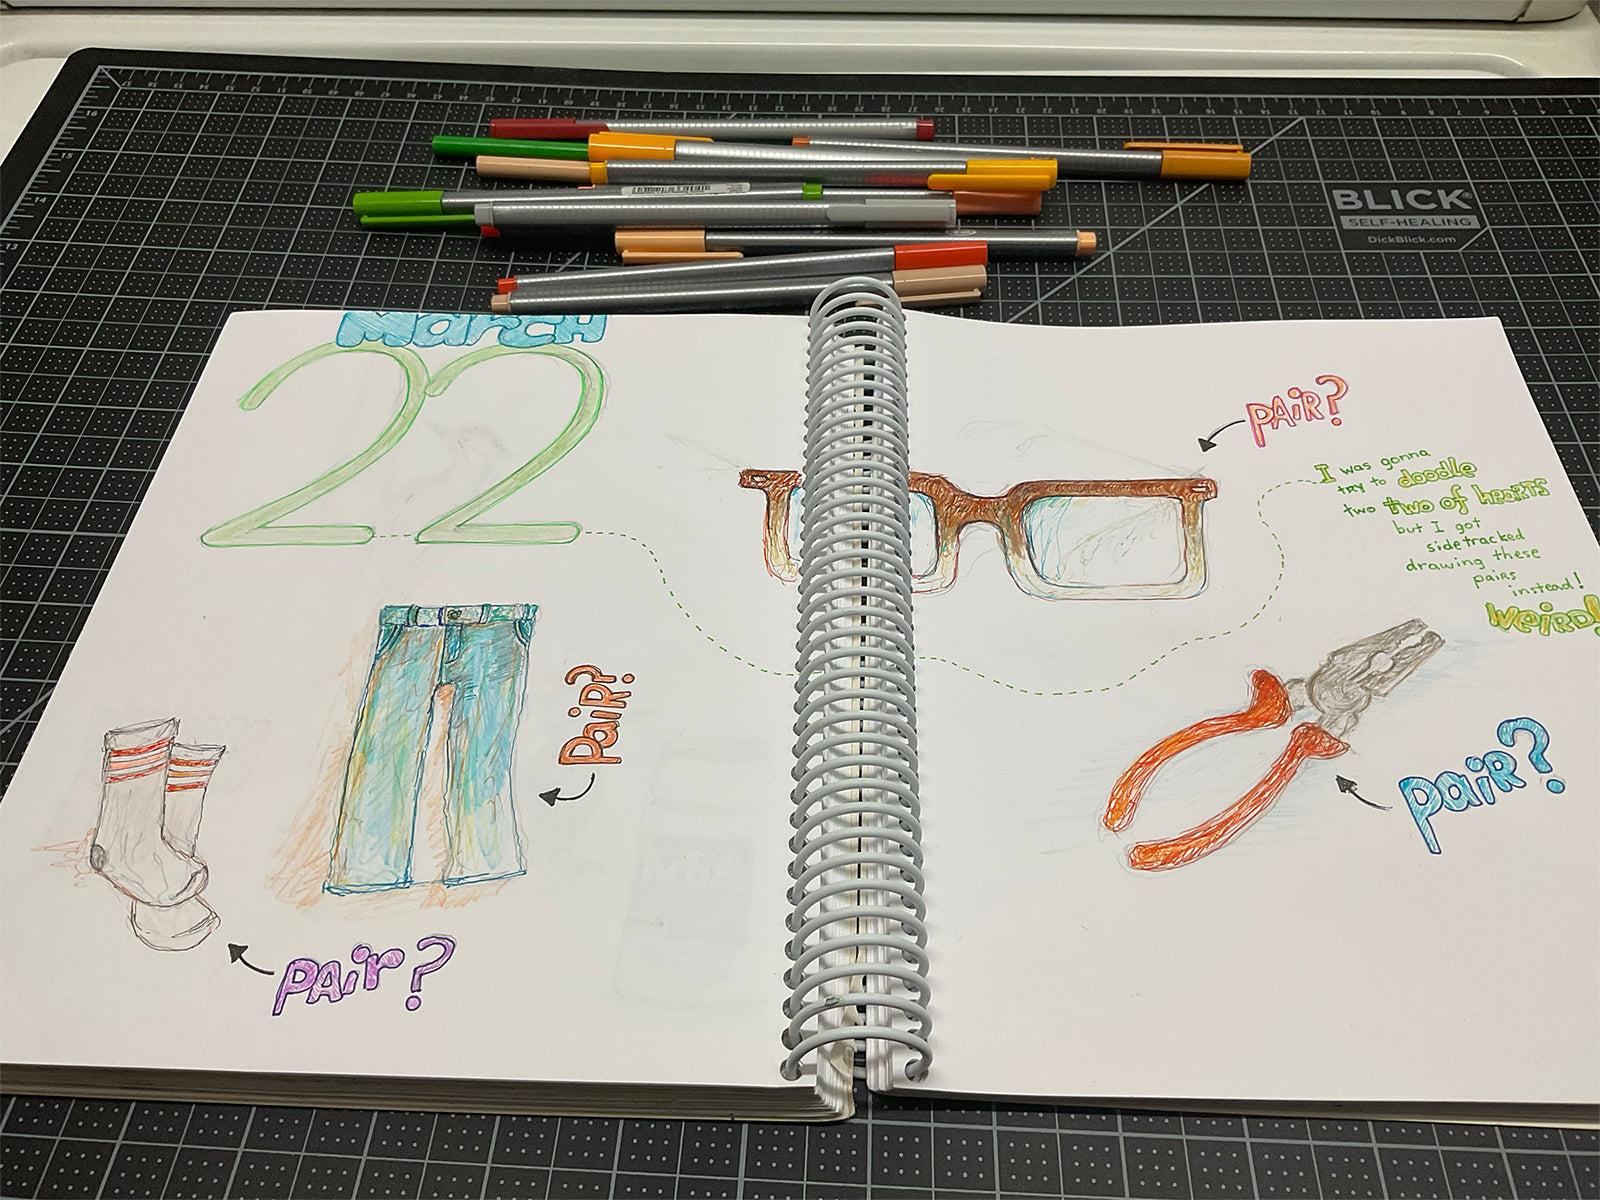 Daily doodle, doodling, blue jeans drawing, socks, drawing, pliers drawing, drawing eyeglasses